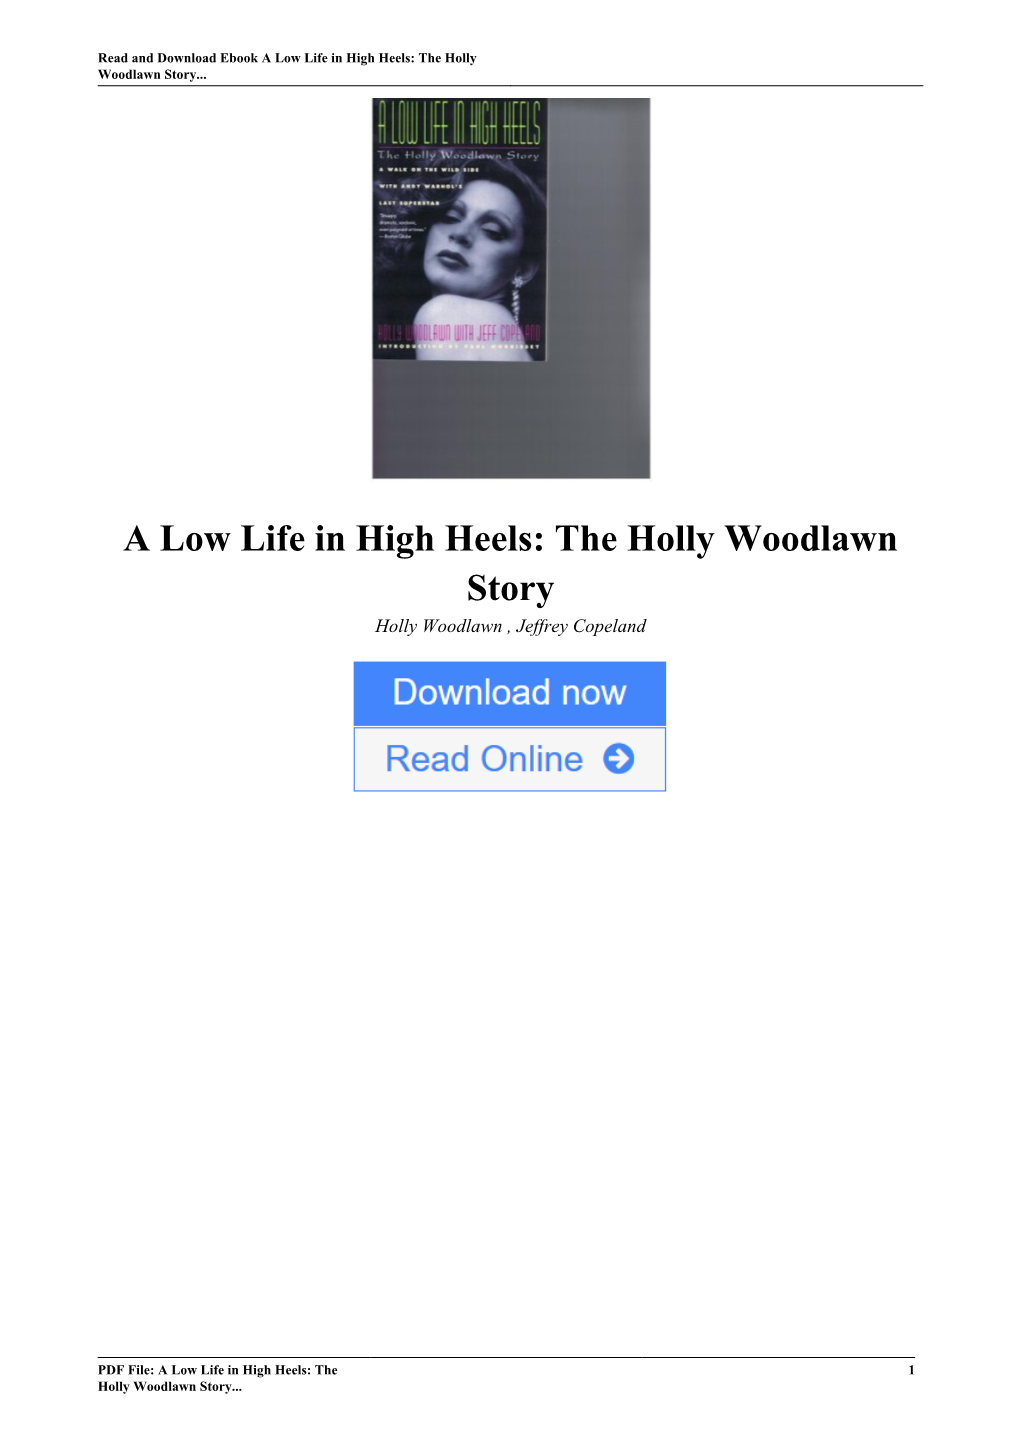 A Low Life in High Heels: the Holly Woodlawn Story by Holly